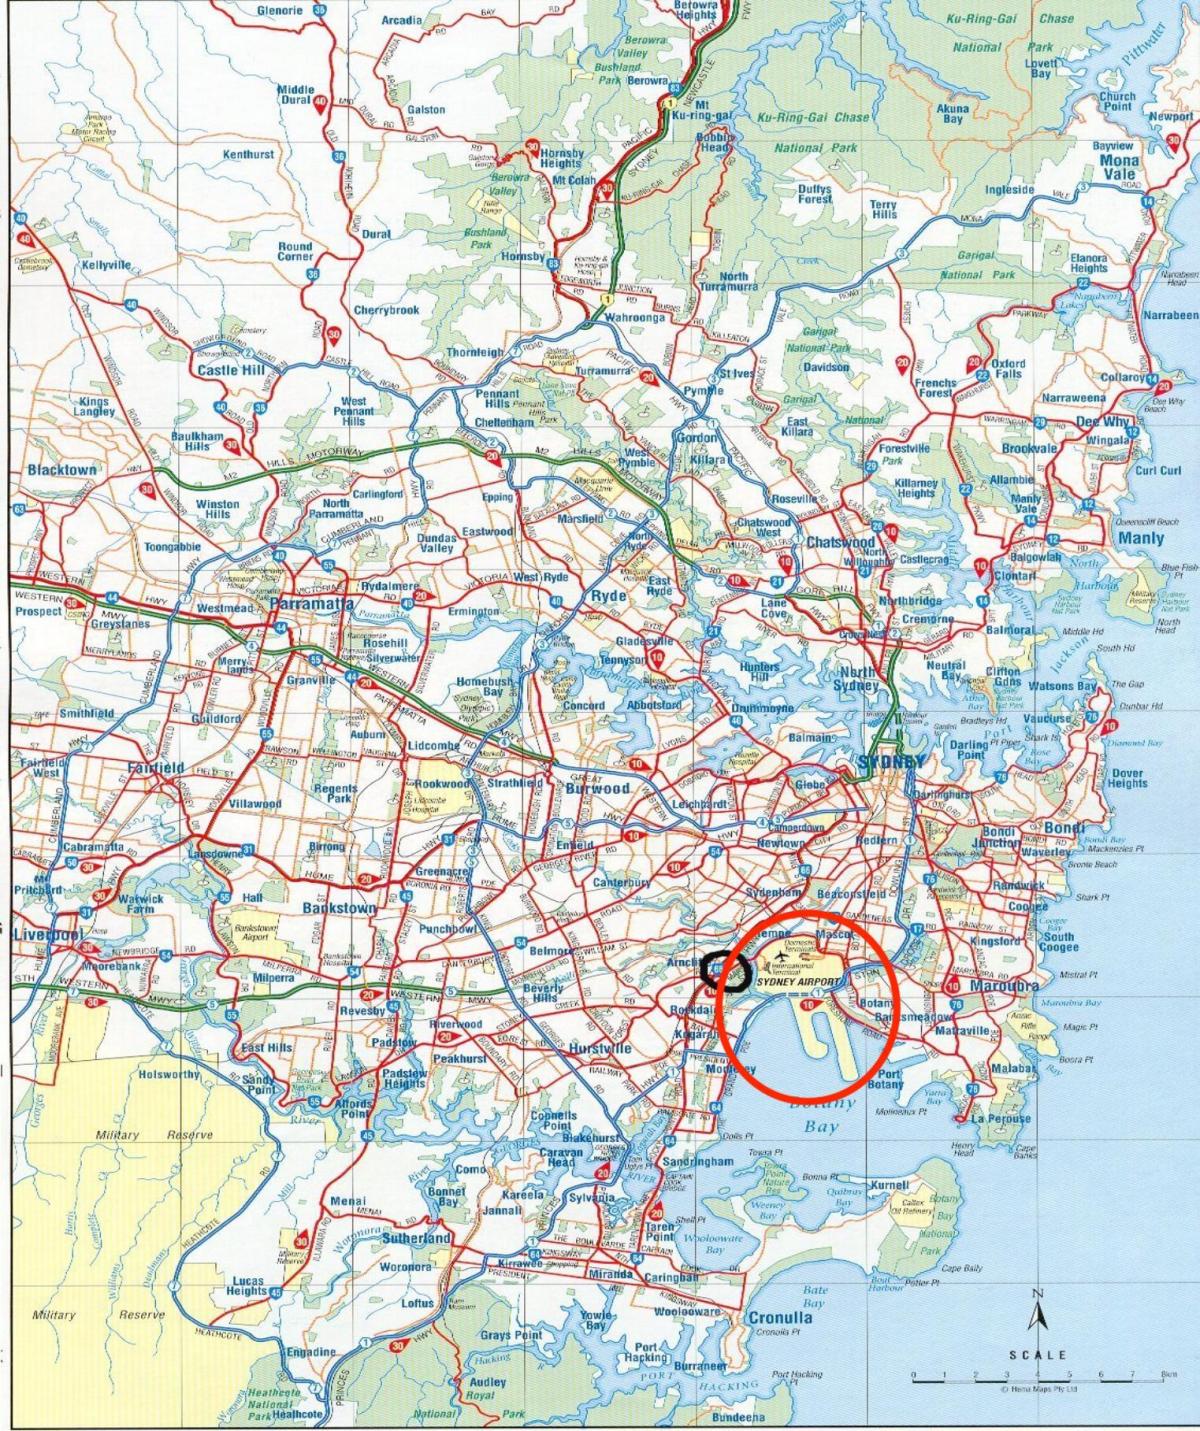 Sydney airports map